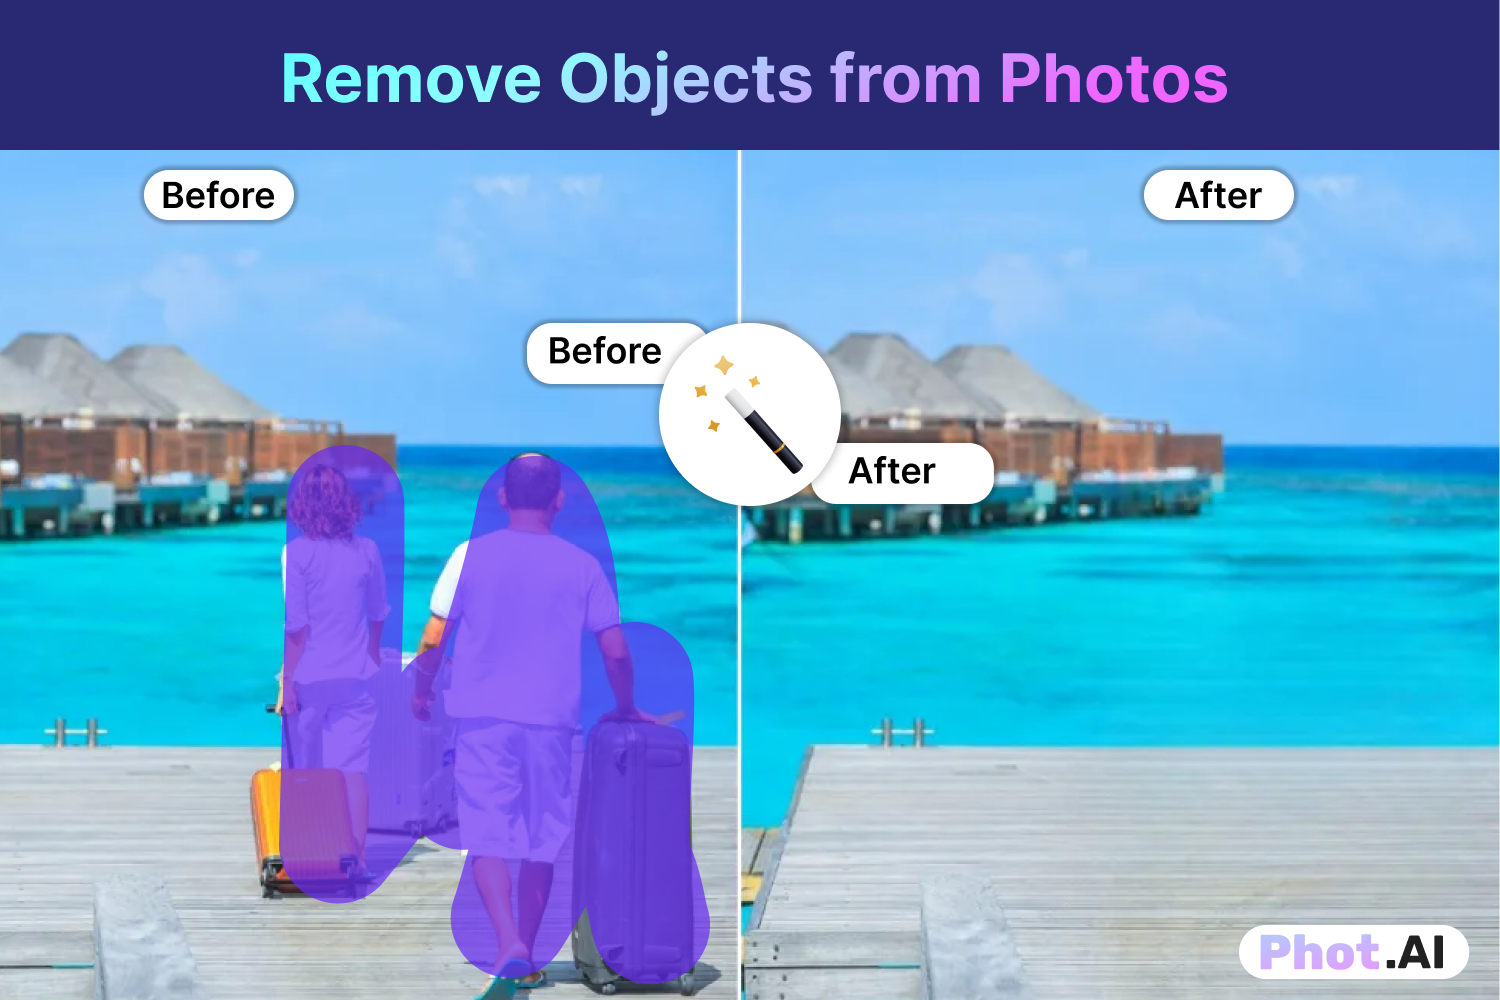 Remove Object from Photos